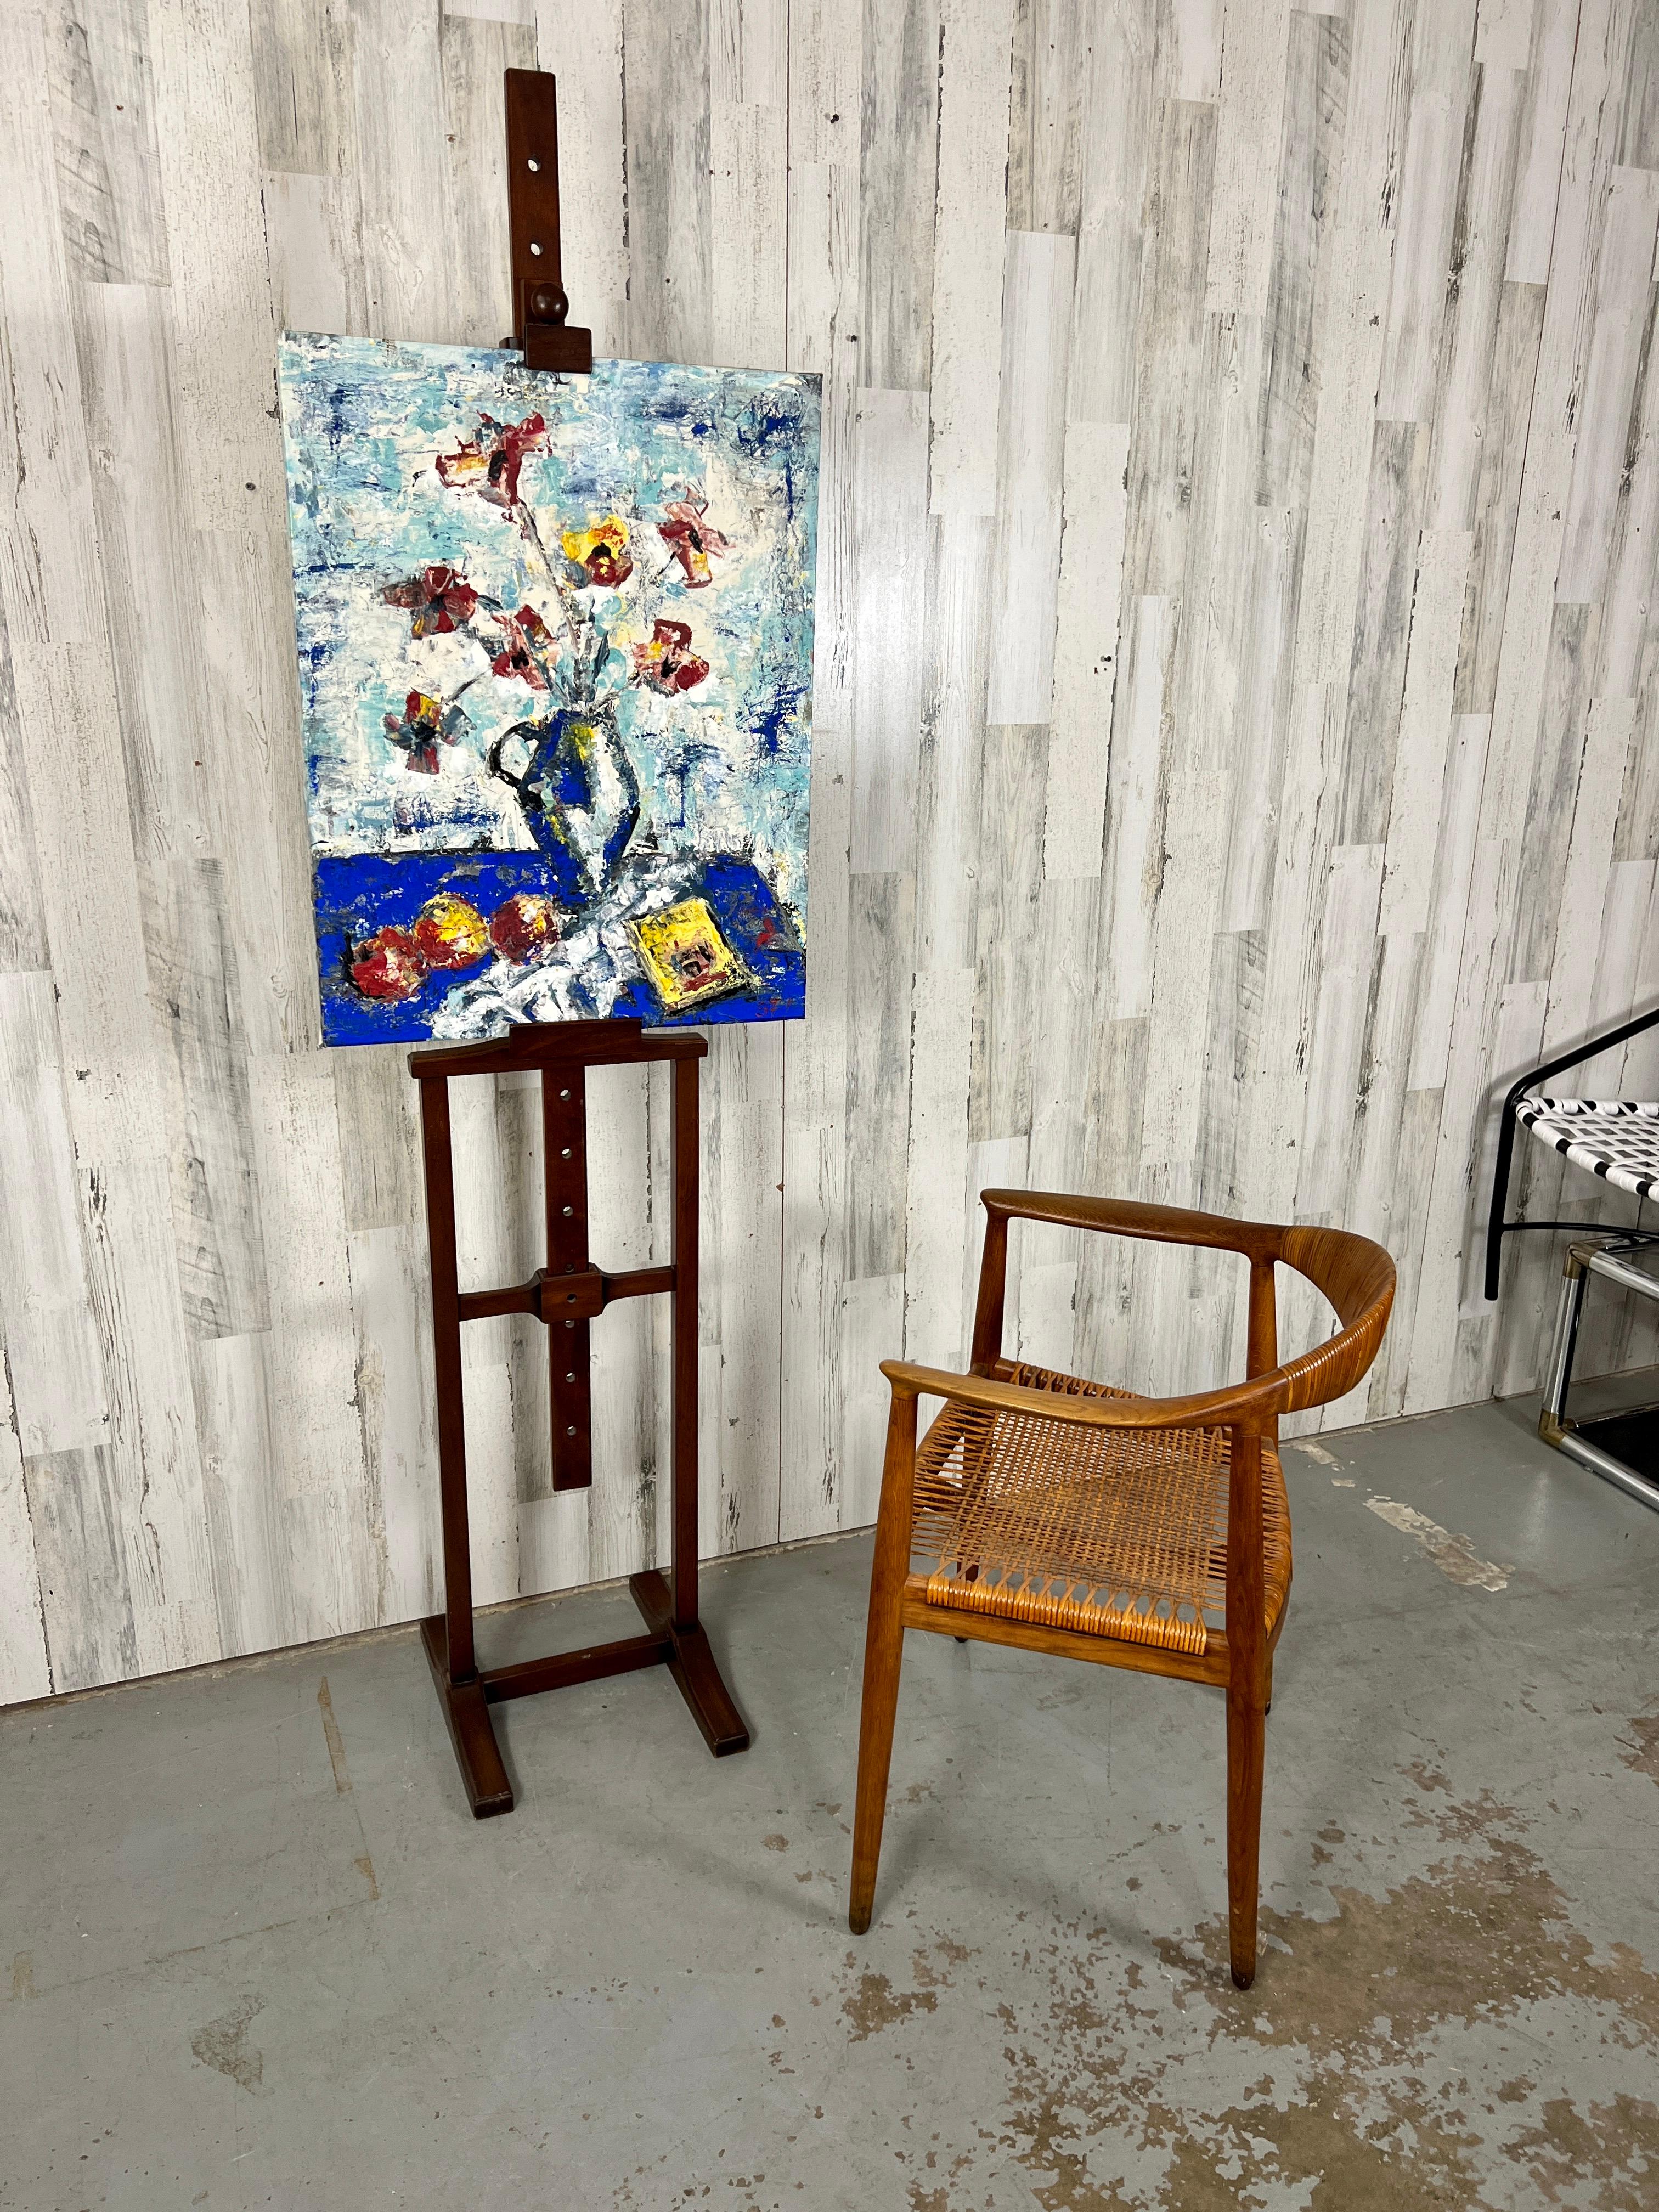 Victorian Eastlake Large and Decorative Easel For Sale at 1stDibs  large  decorative easel, large decorative floor easel, decorative floor easels for  pictures